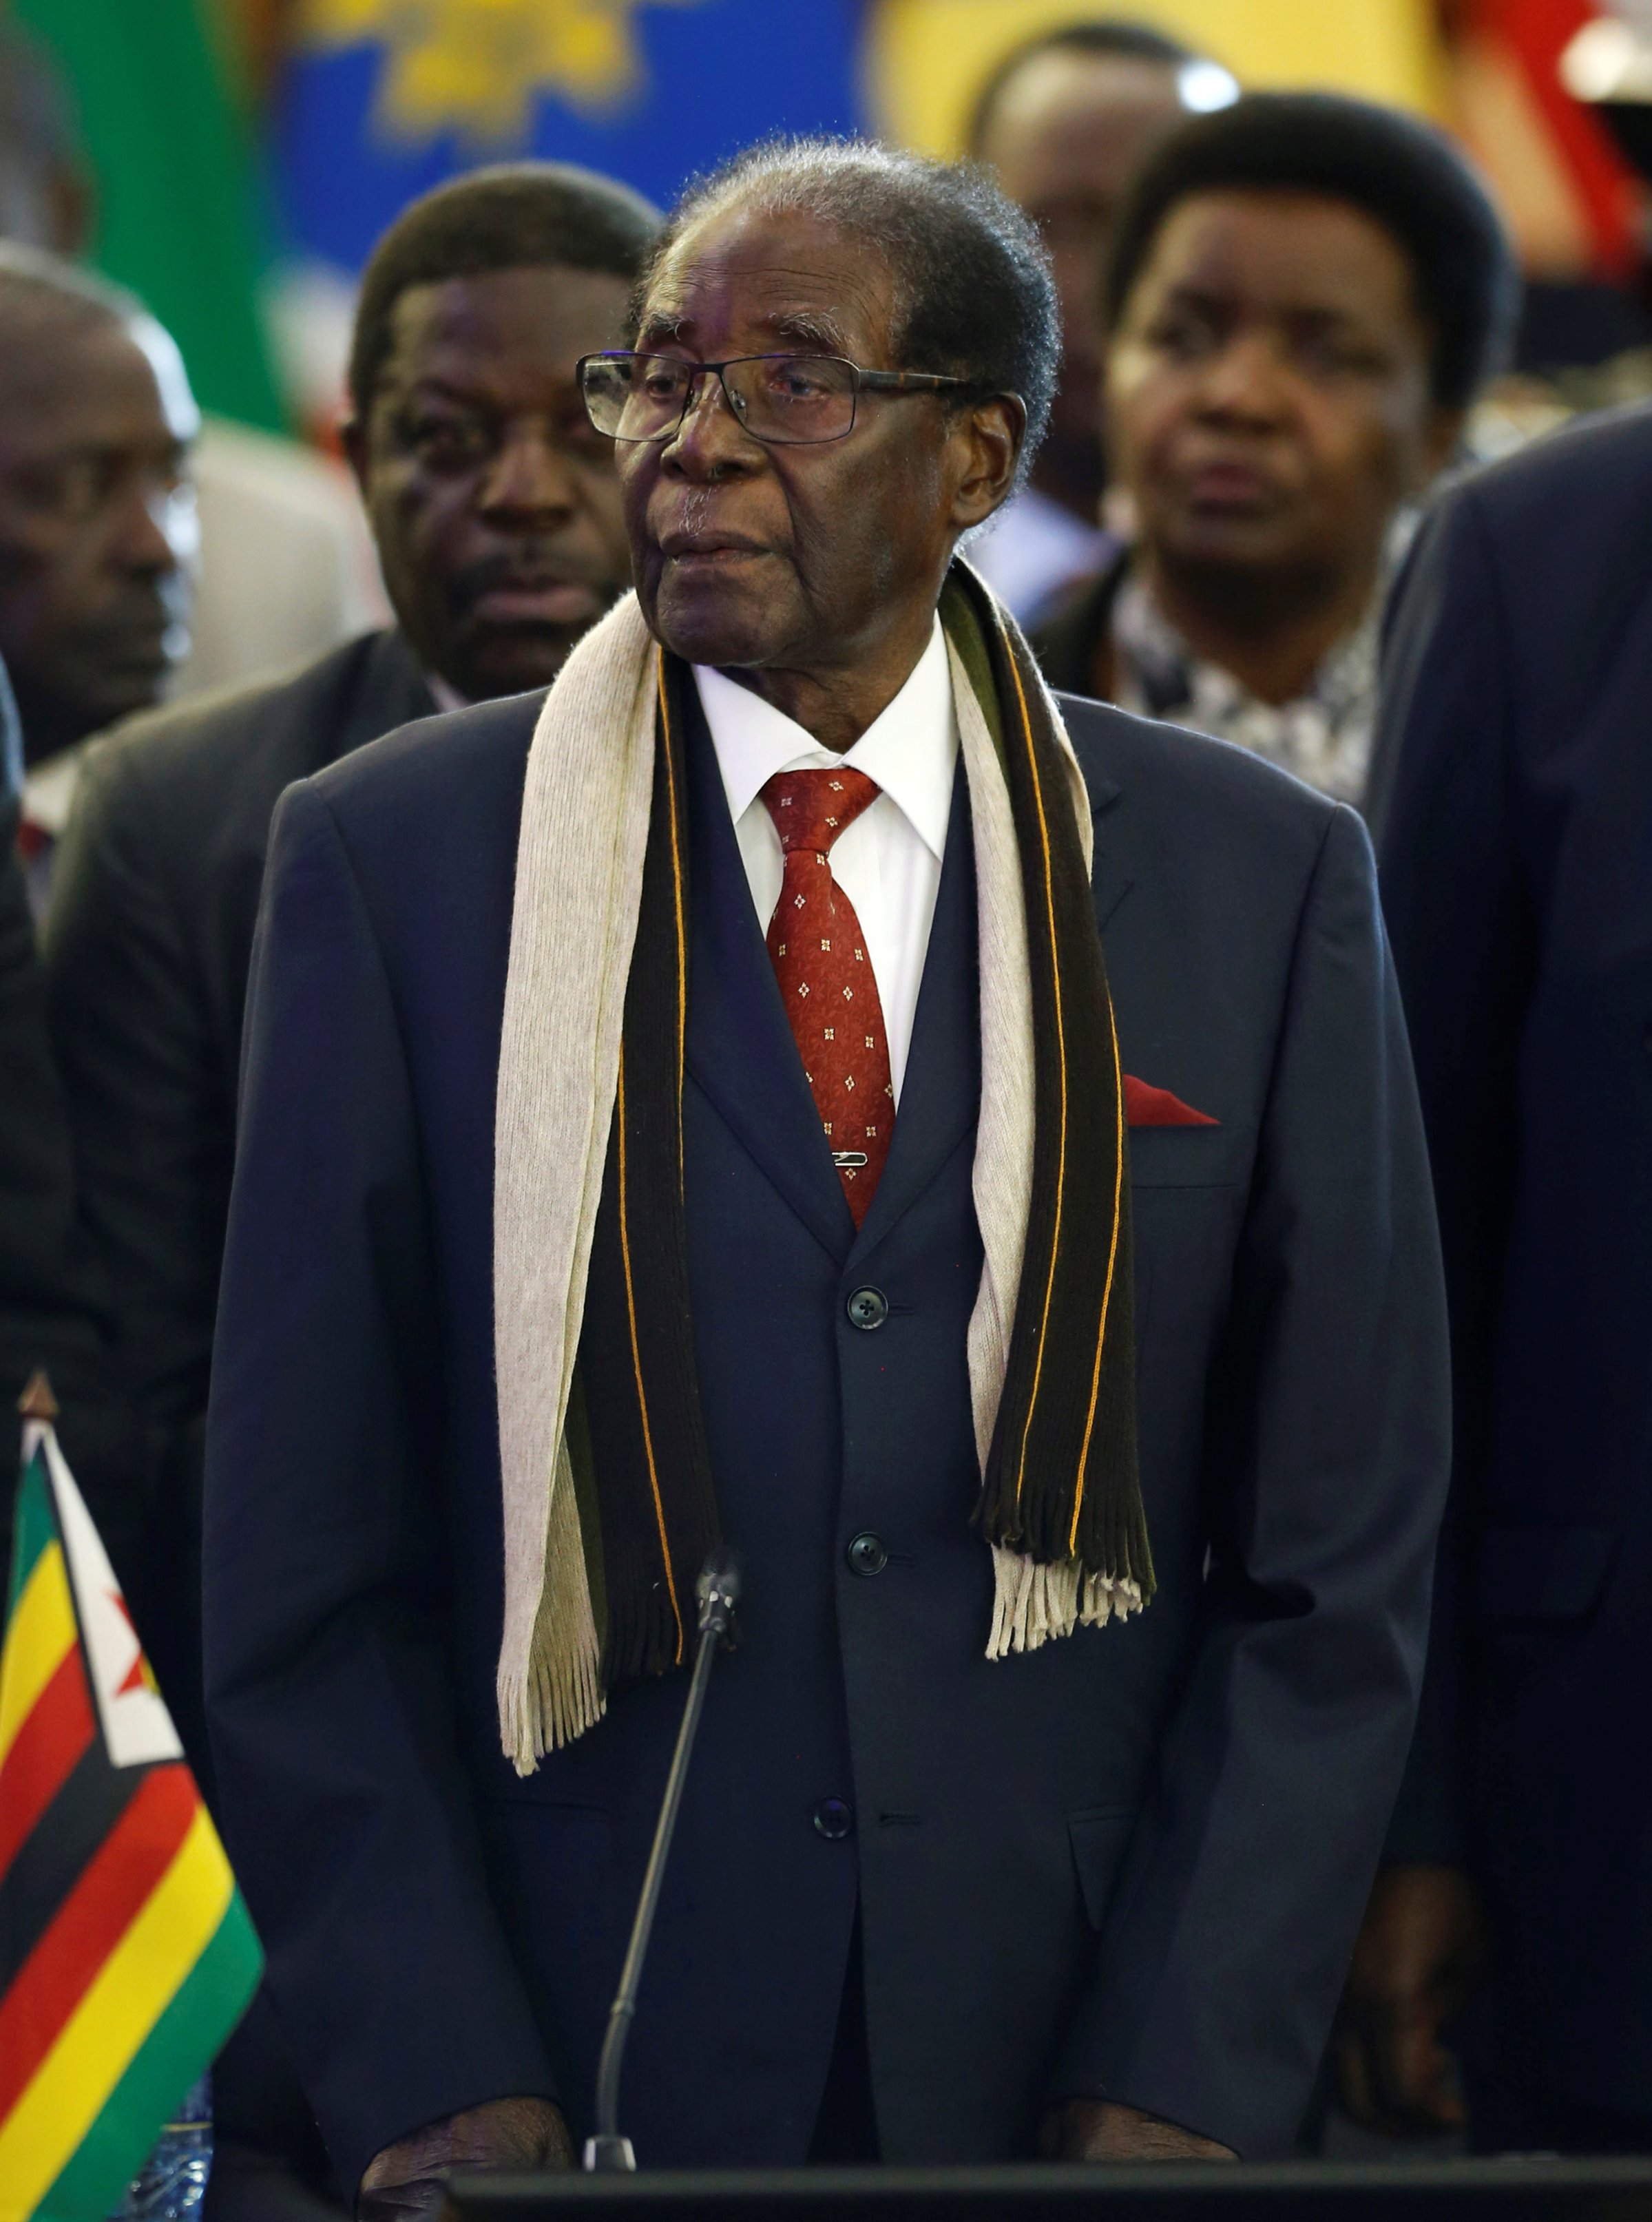 Zimbabwean President Robert Mugabe attends the 37th Ordinary SADC Summit of Heads of State and Government in Pretoria